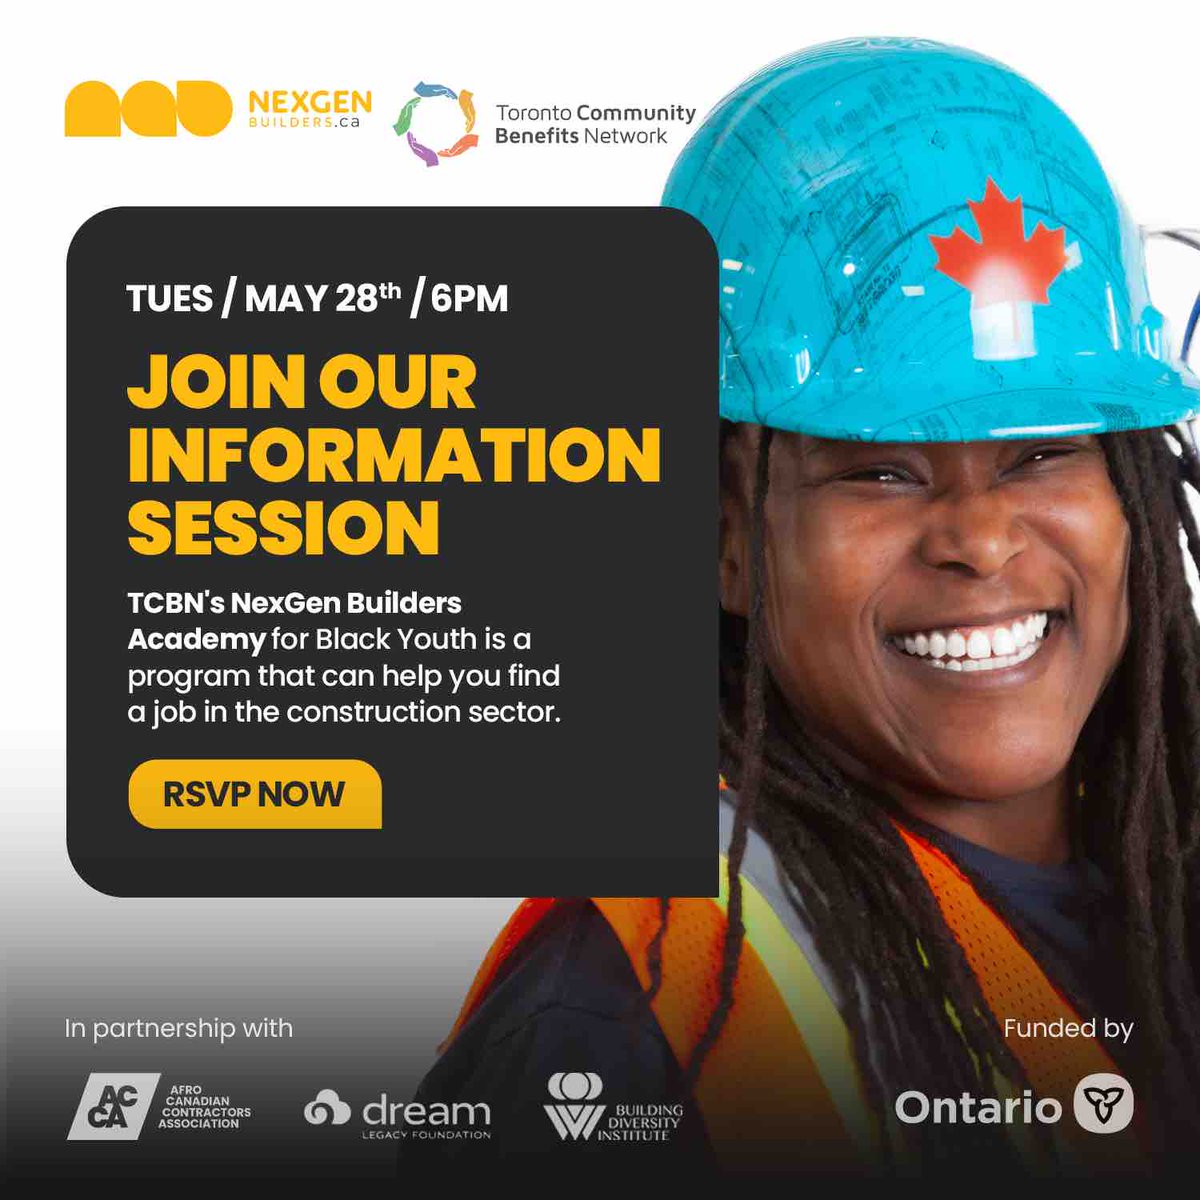 TCBN’s NexGen Builders Academy for Black Youth is a program that can help you find a job in the construction sector. Join the info session on May 28 at 6 PM to learn more. Please visit nexgenbuilders.ca/academy_info_s… to RSVP #communitybenefits #constructionjobs